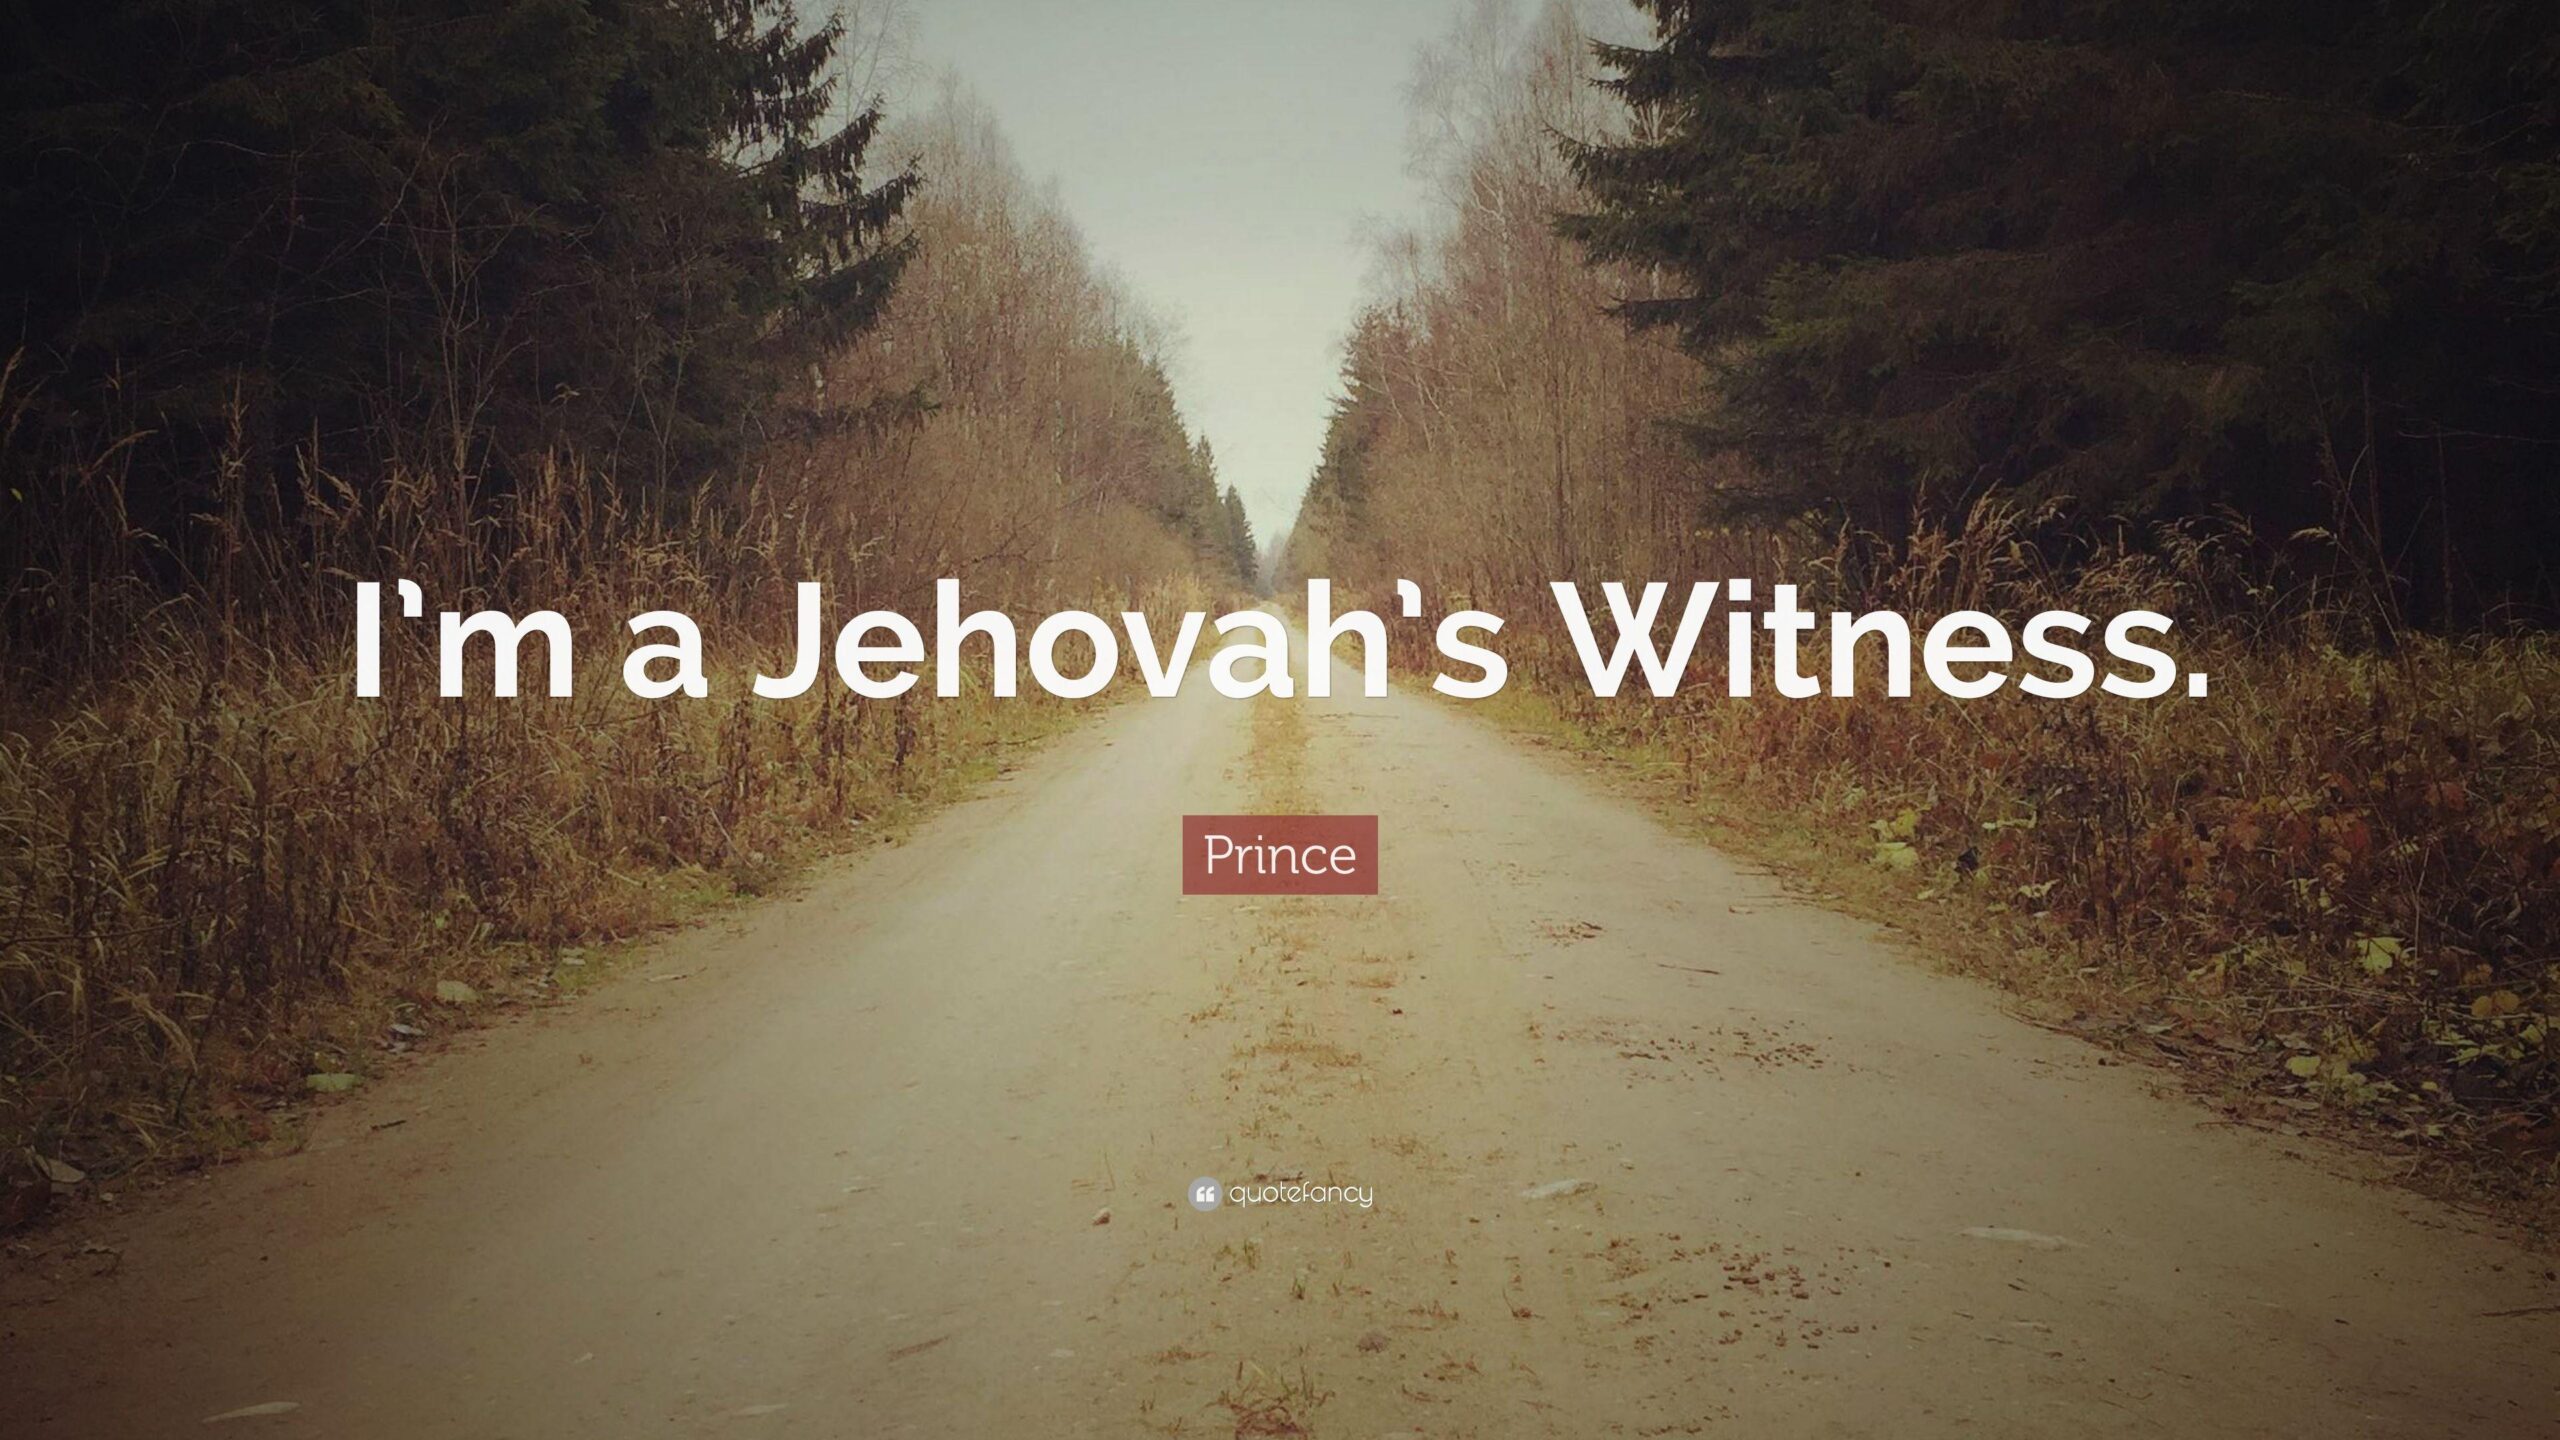 Prince Quote “I’m a Jehovah’s Witness”